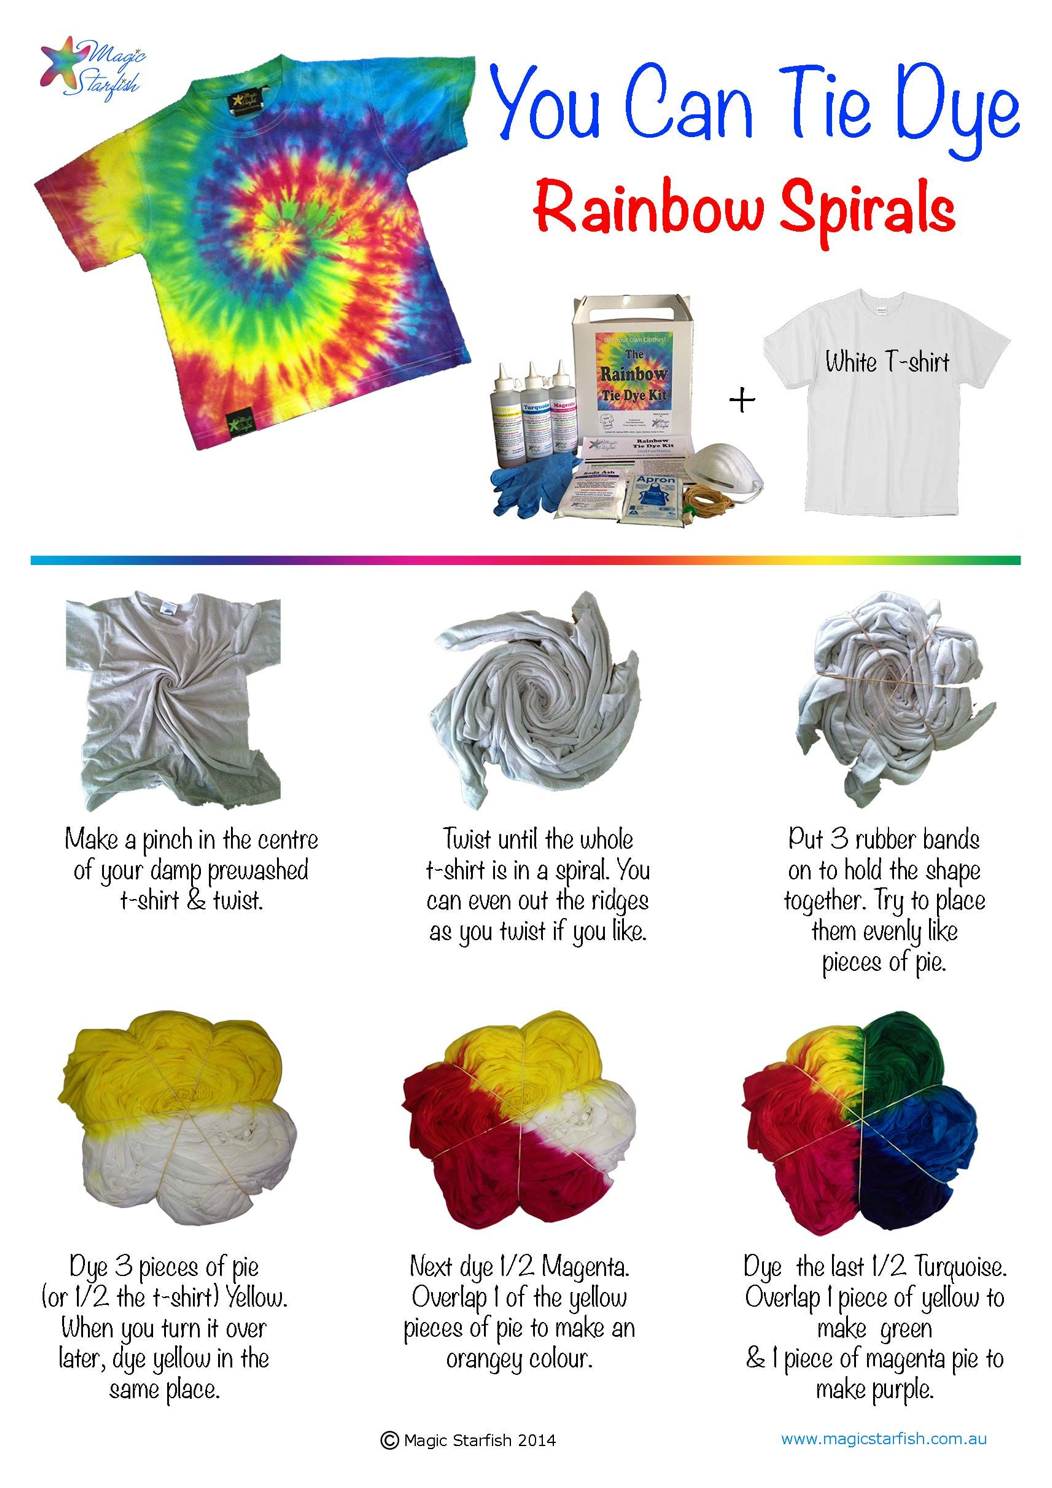 lethgo-to-a-blog-different-ways-to-fold-tie-dye-shirts